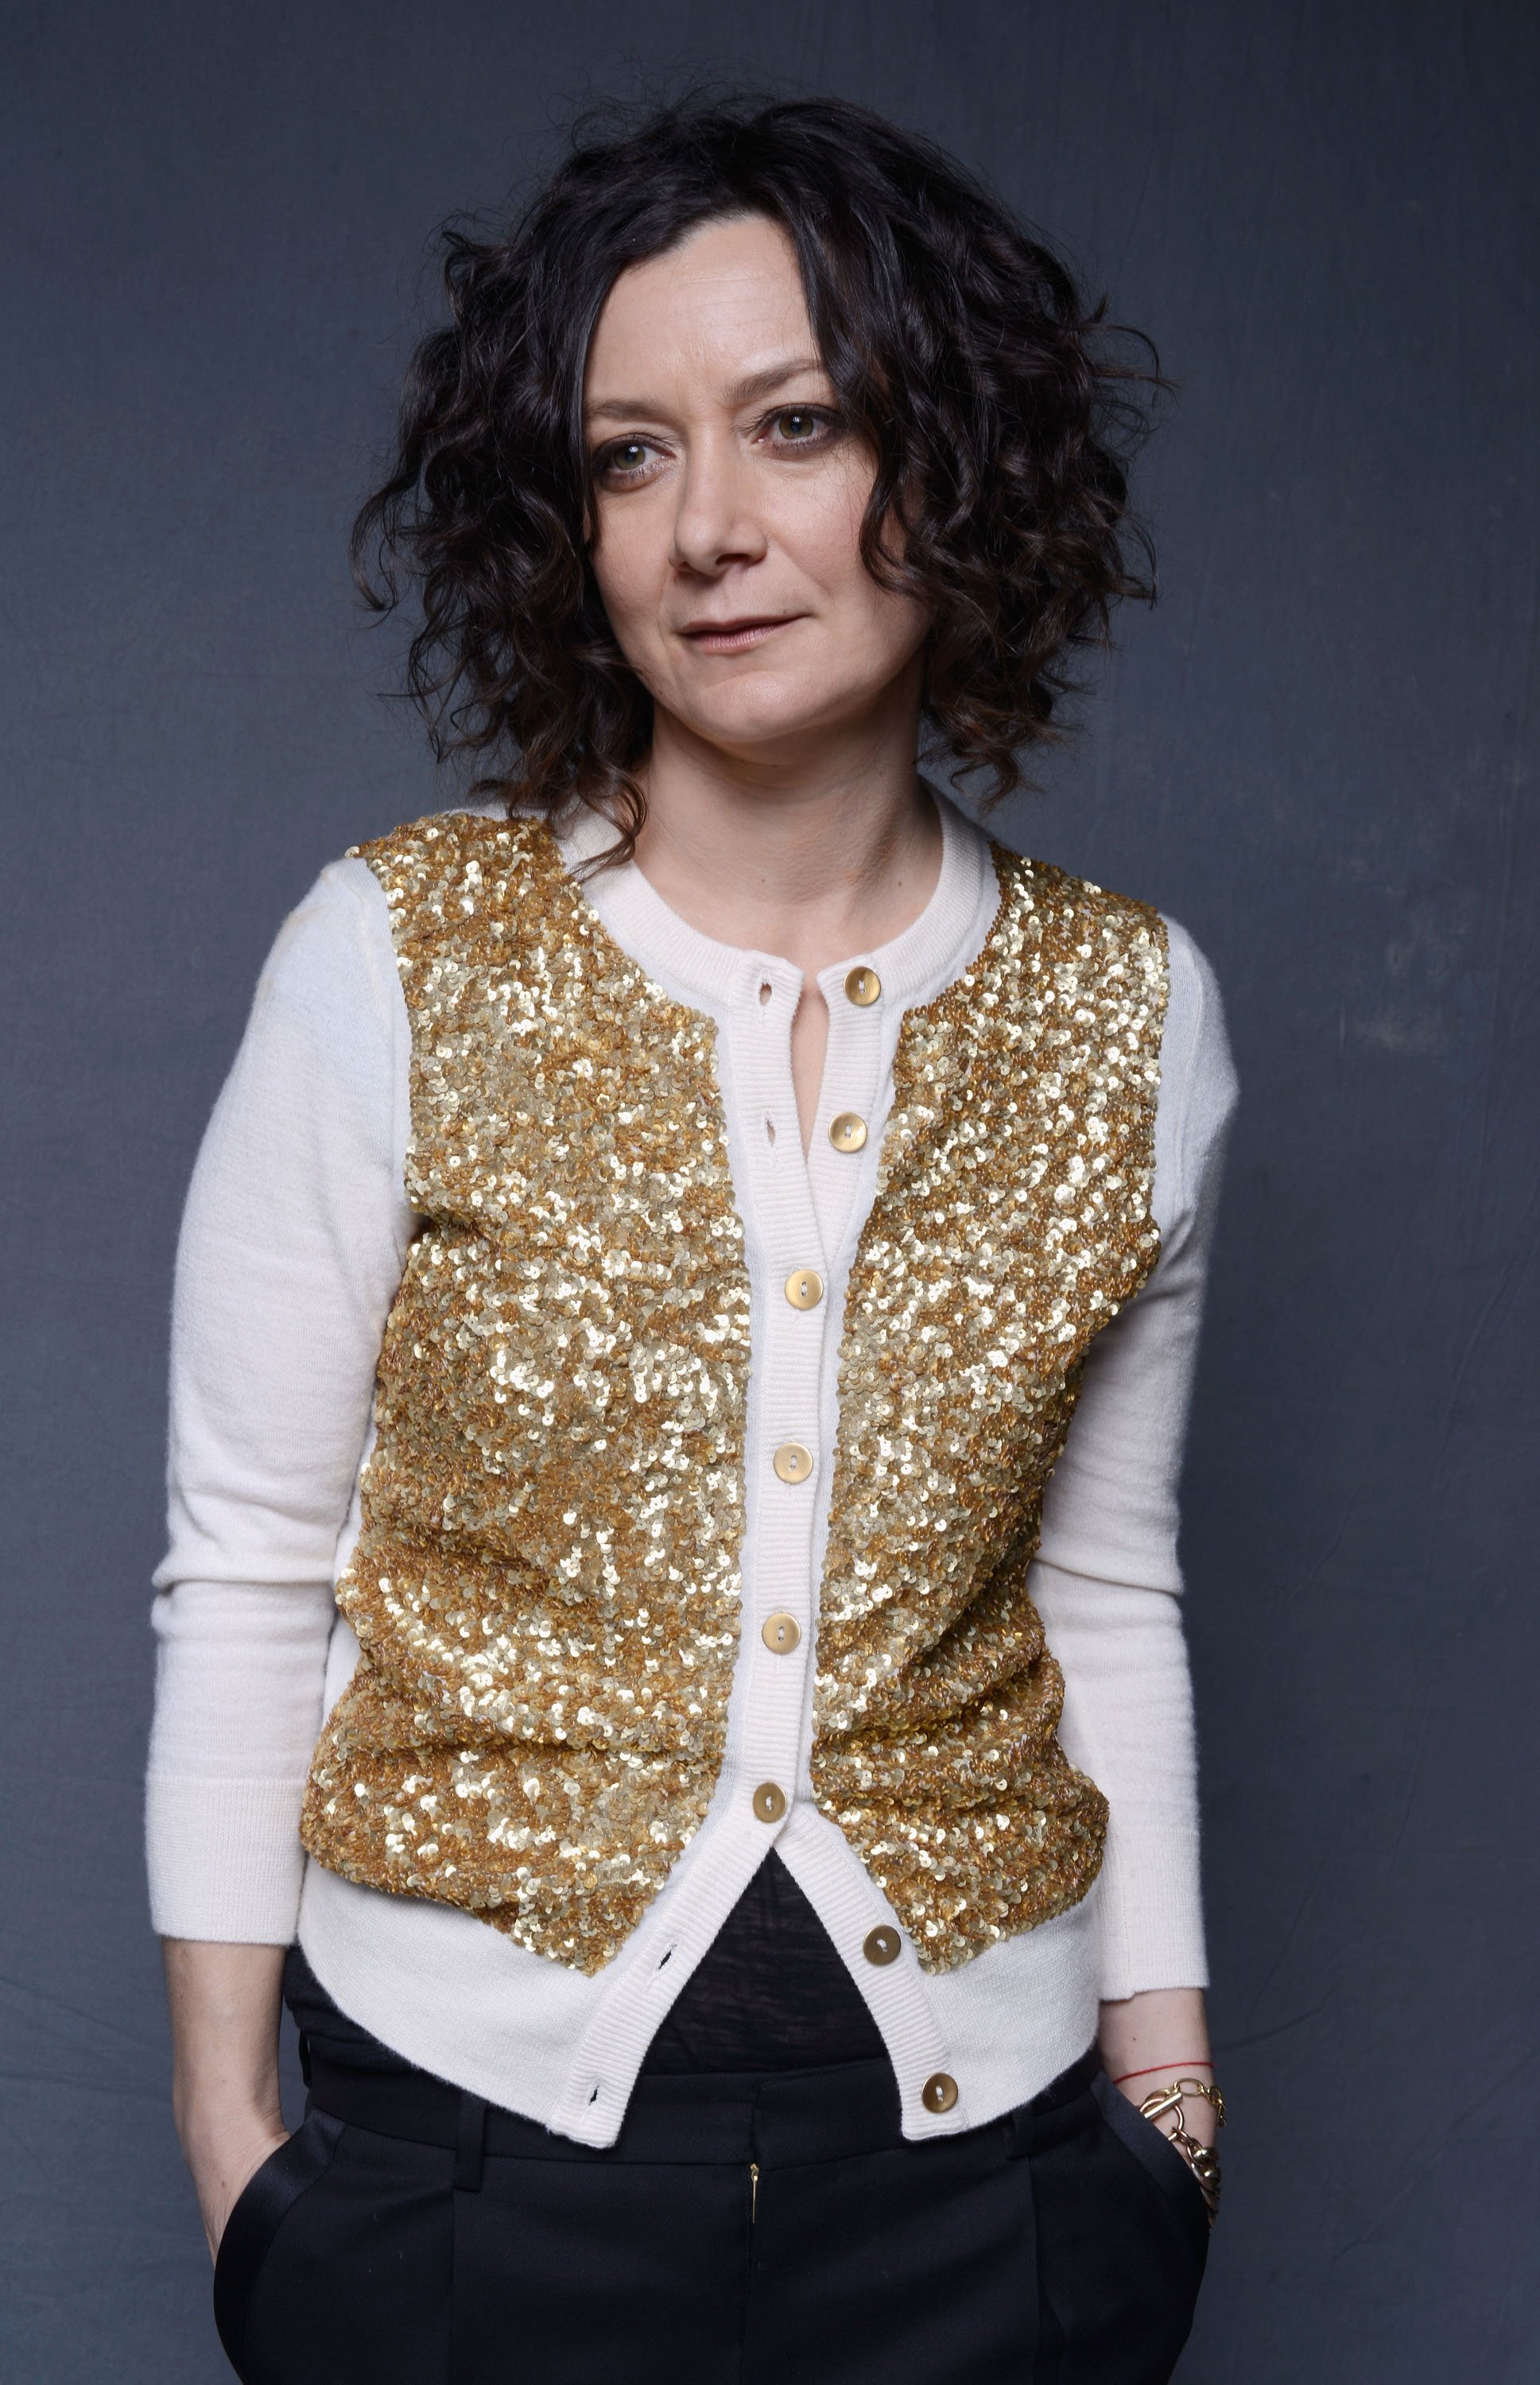 Sara Gilbert poses for a Wonderwall portrait at The Art of Elysium's 7th Annual HEAVEN Gala on January 11, 2014, in Los Angeles, California. | Source: Getty Images.